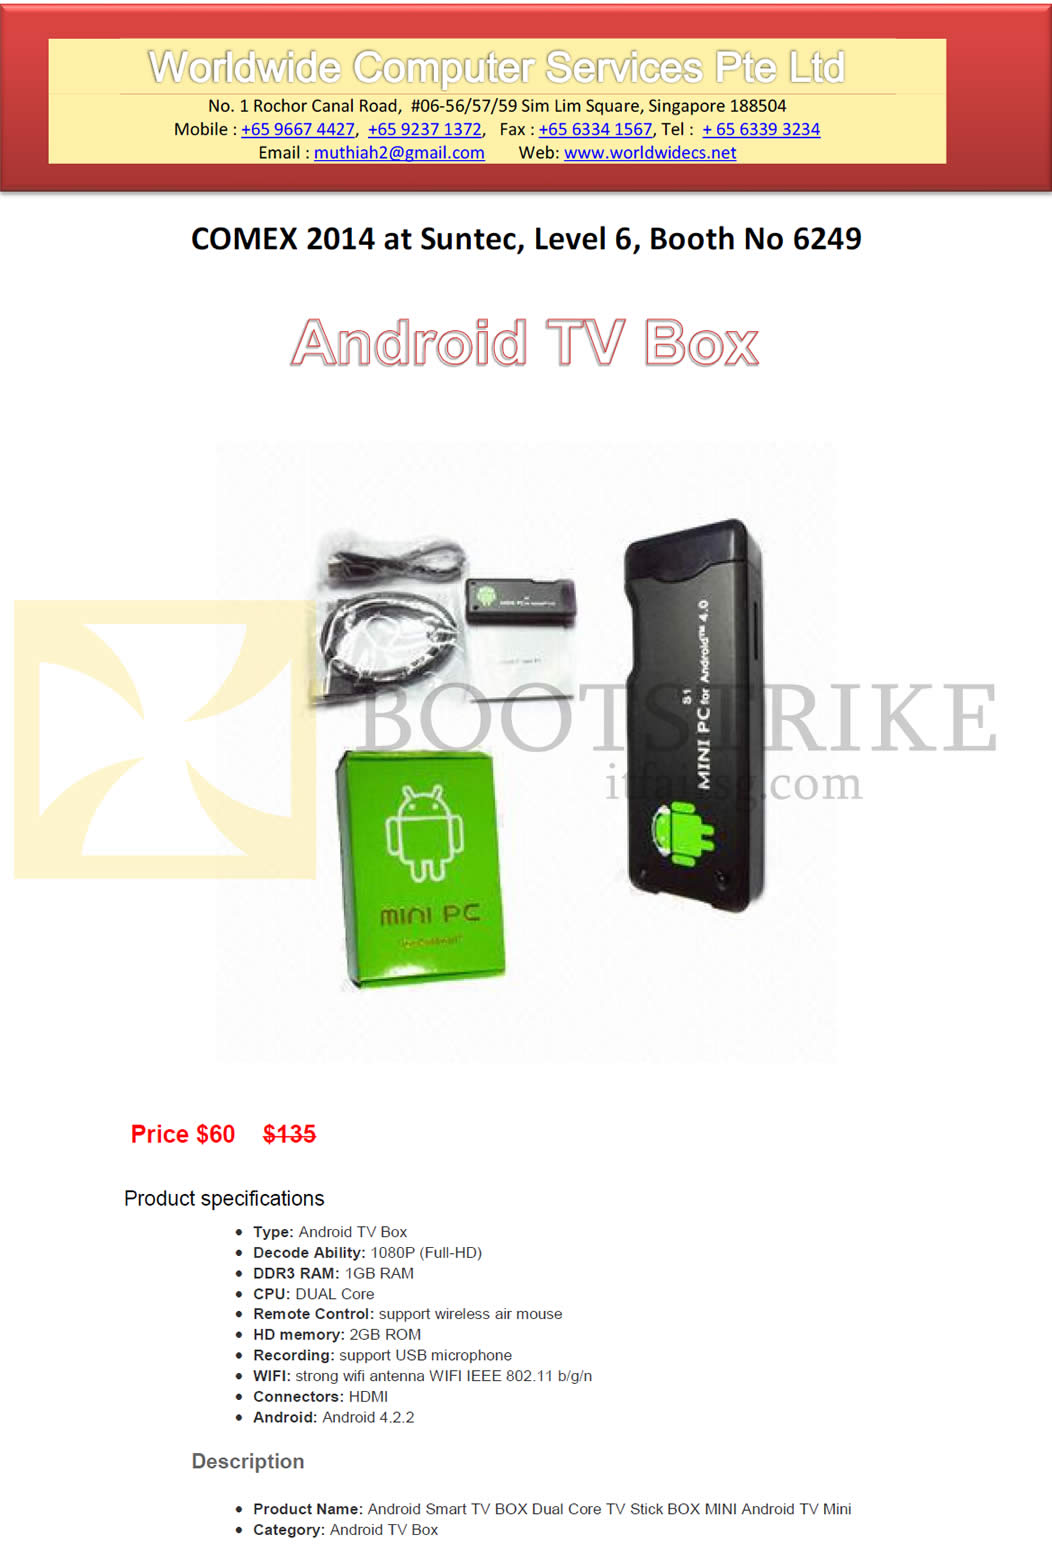 COMEX 2014 price list image brochure of Worldwide Computer Services Android TV Box